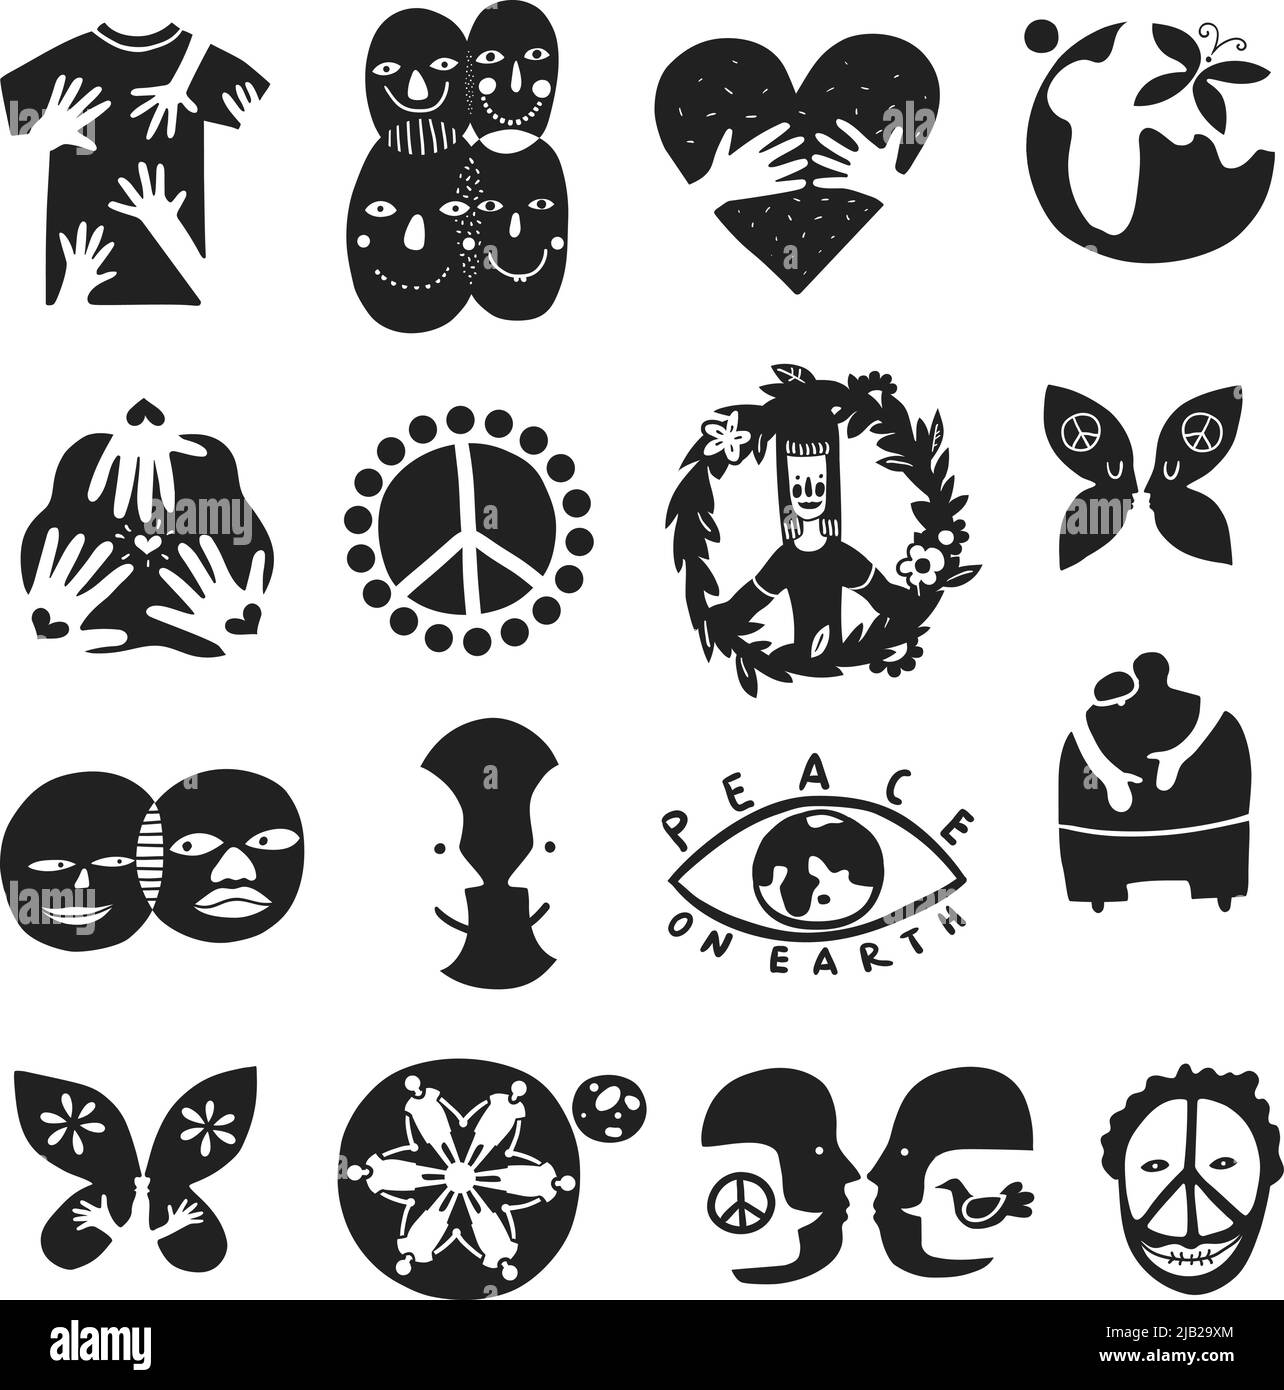 Set of monochrome international friendship symbols with peace sign, brother, children of earth, equality isolated vector illustration Stock Vector